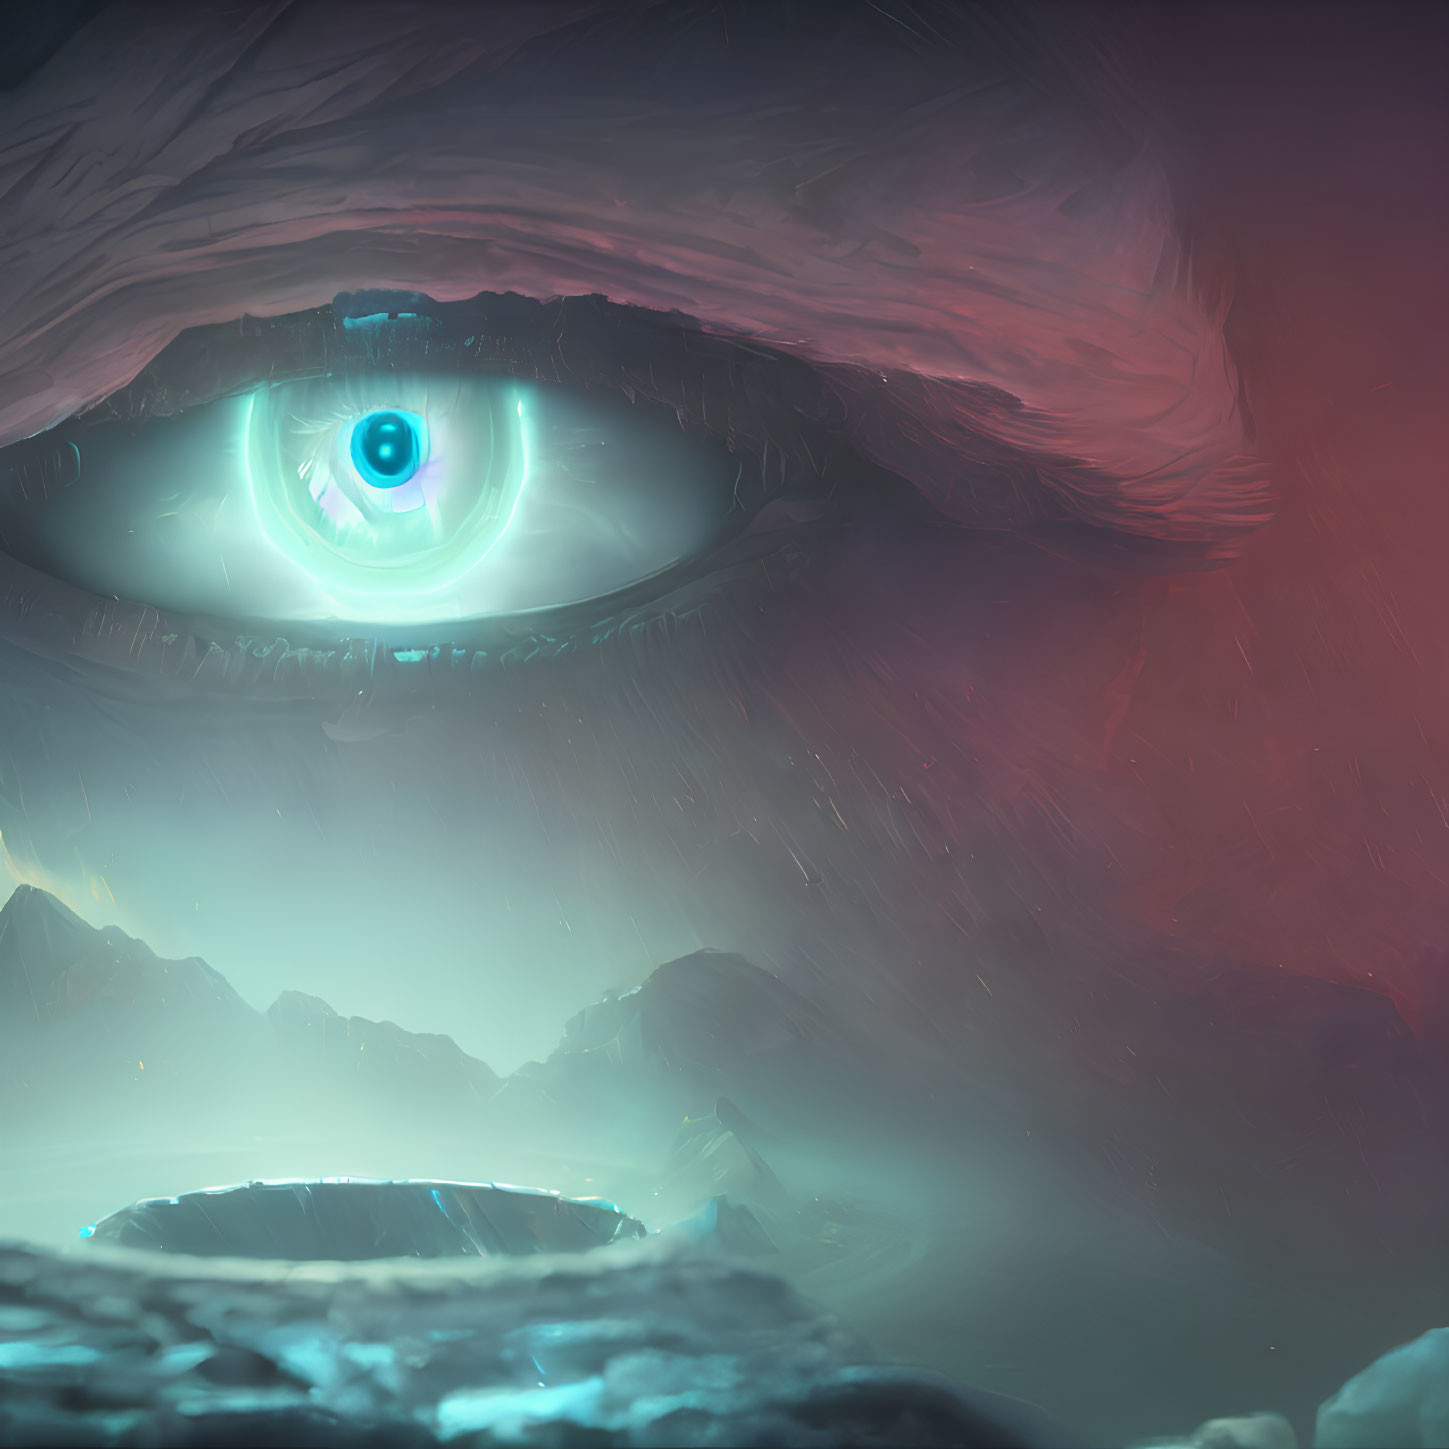 Surreal landscape with giant eye, mountains, and glowing structure